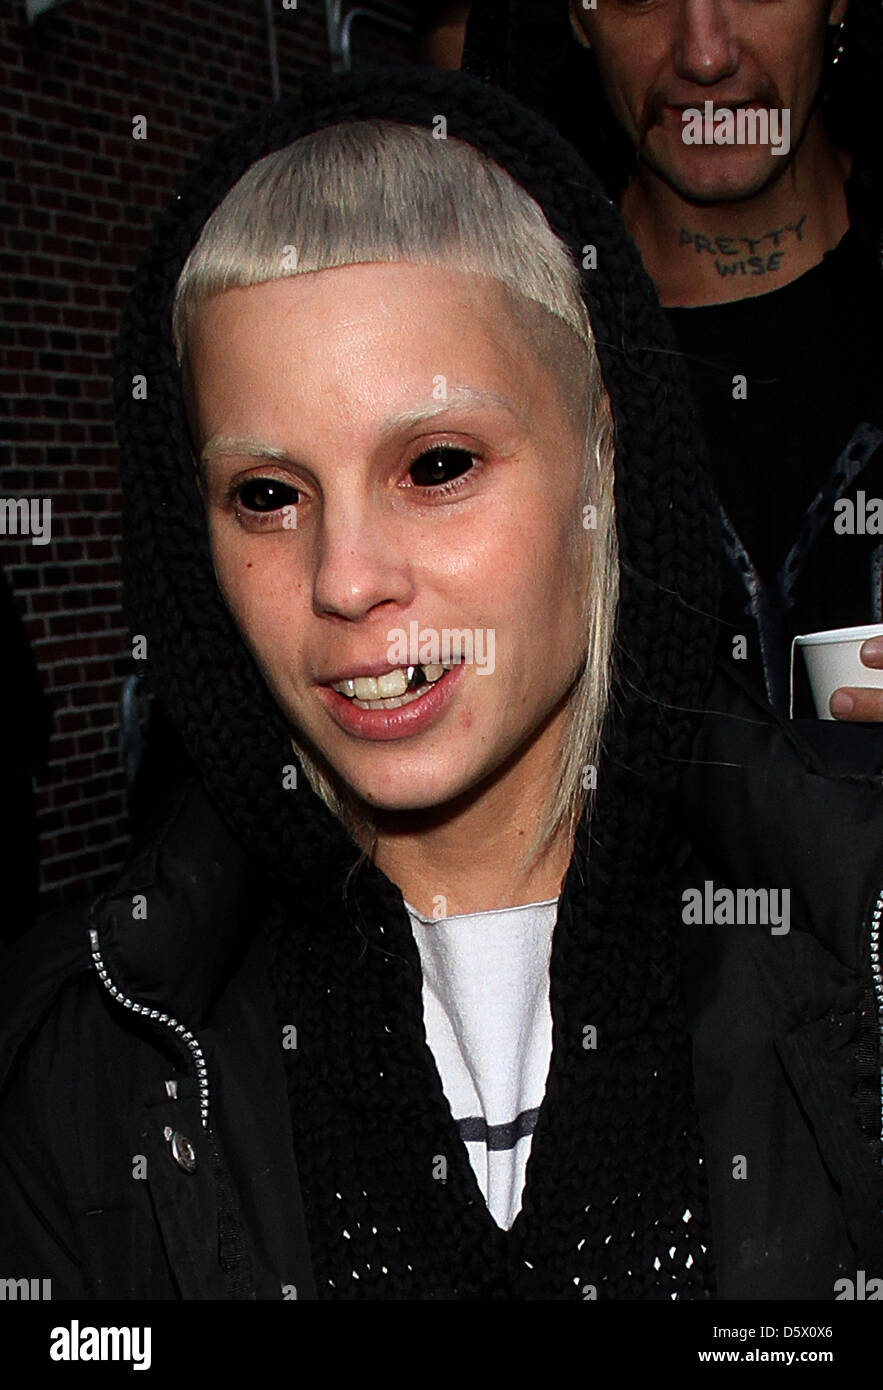 Yolandi Visser of Die Antwoord Celebrities outside of the Ed Sullivan Theater for 'The Late Show with David Letterman' New York Stock Photo